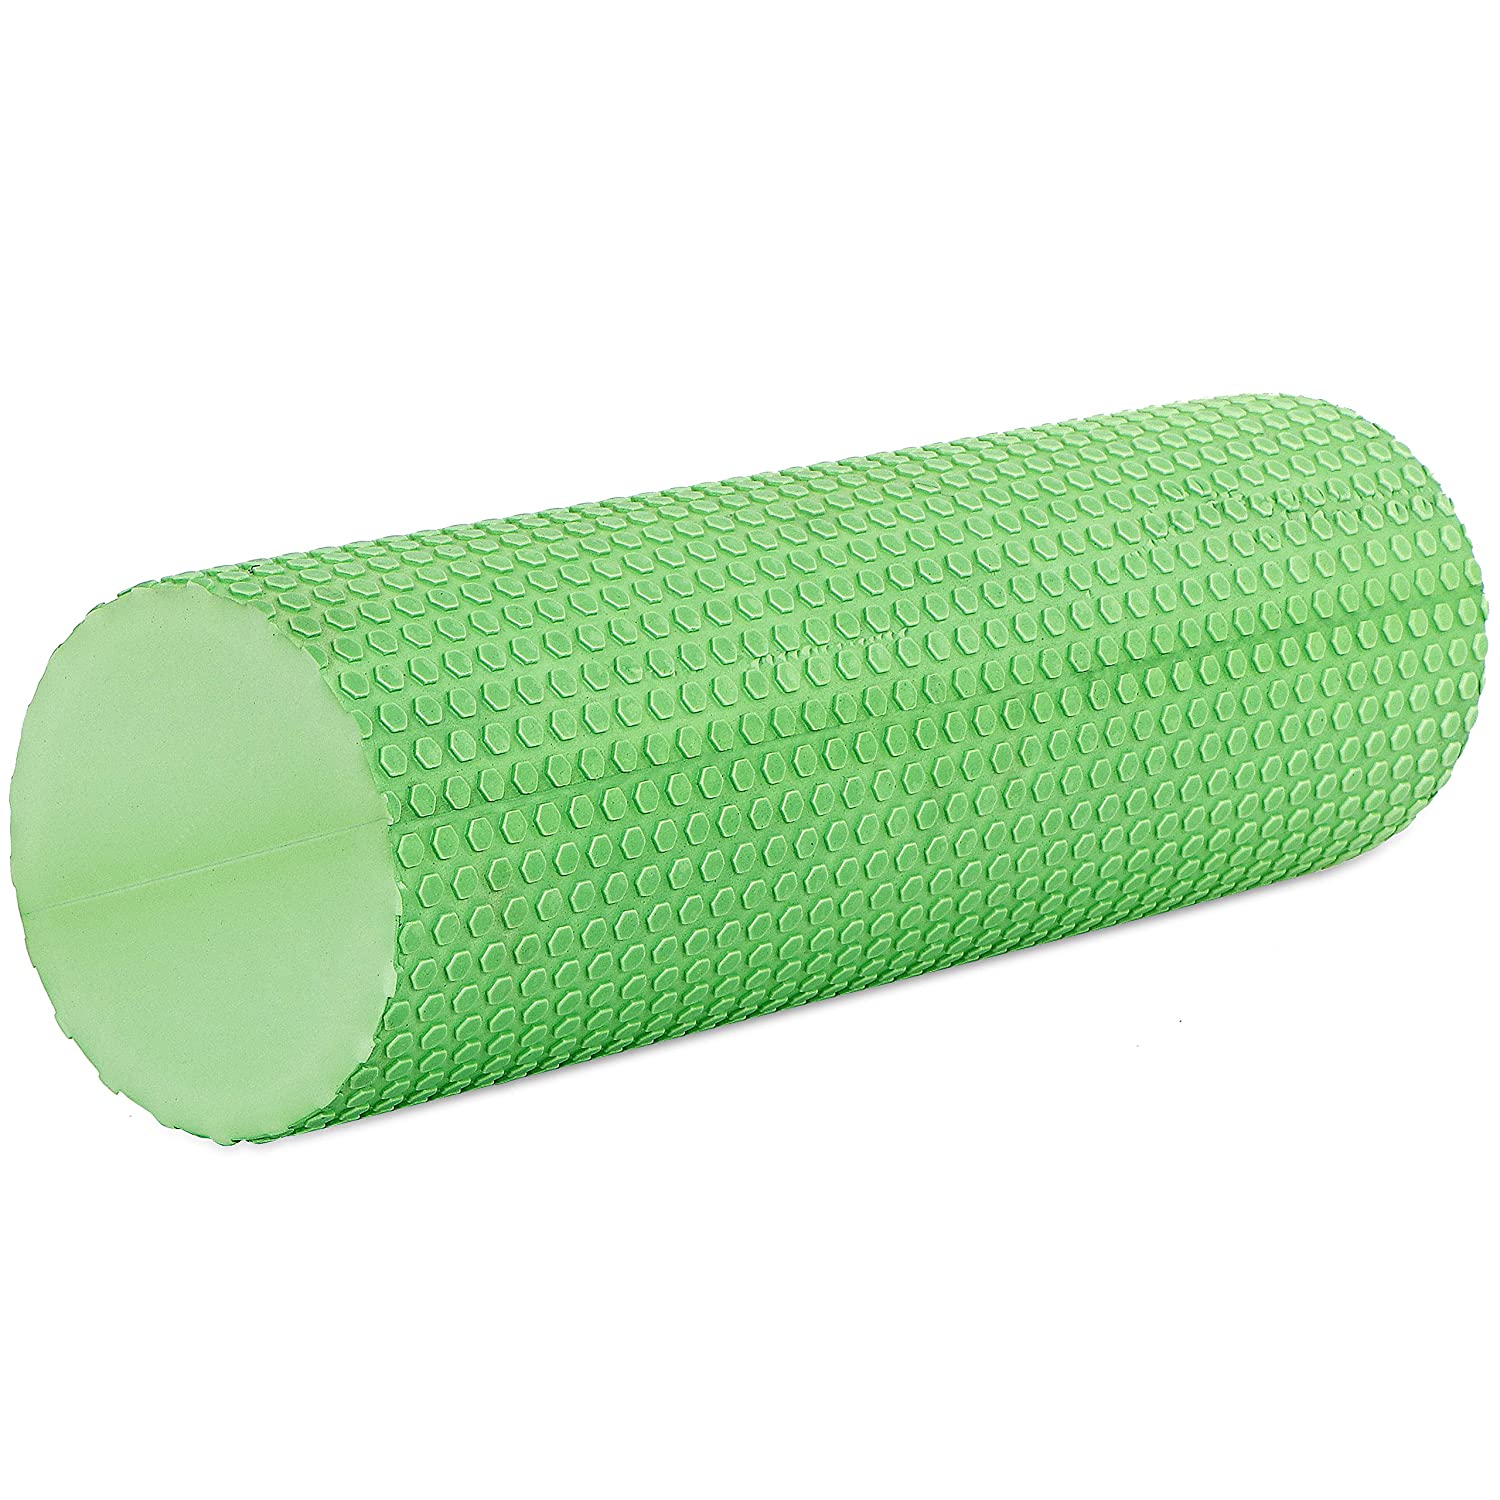 CrossFit Yoga & Pilates Op Zulu Foam roller with trigger massage point zones for deep massage rehab/physiotherapy/Fitness 